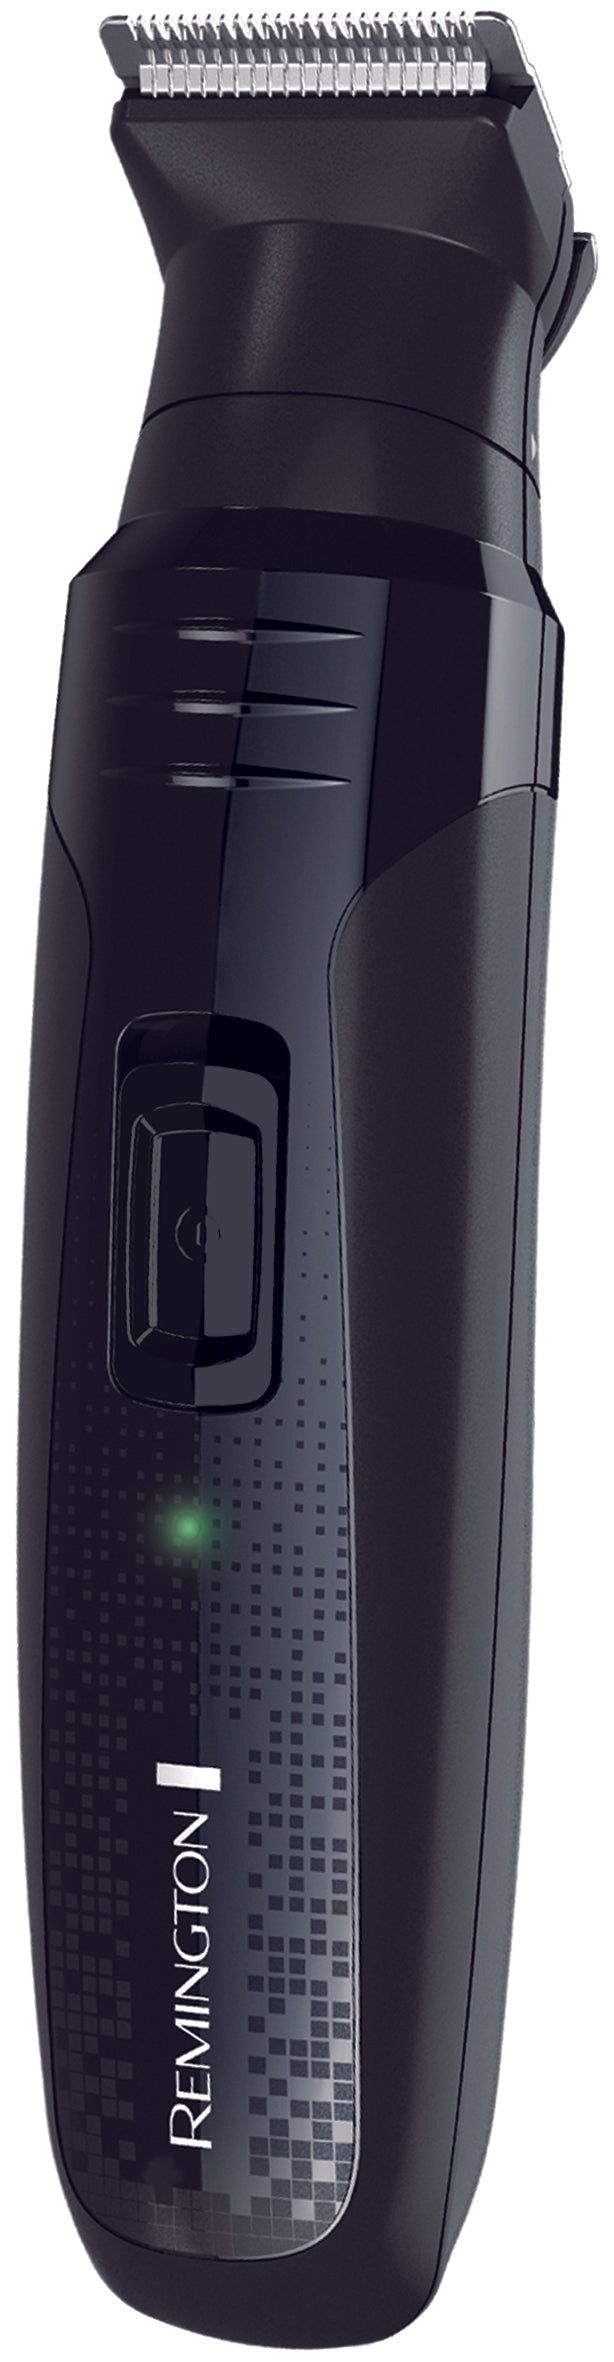 Remington Lithium All in One Beard Trimmer